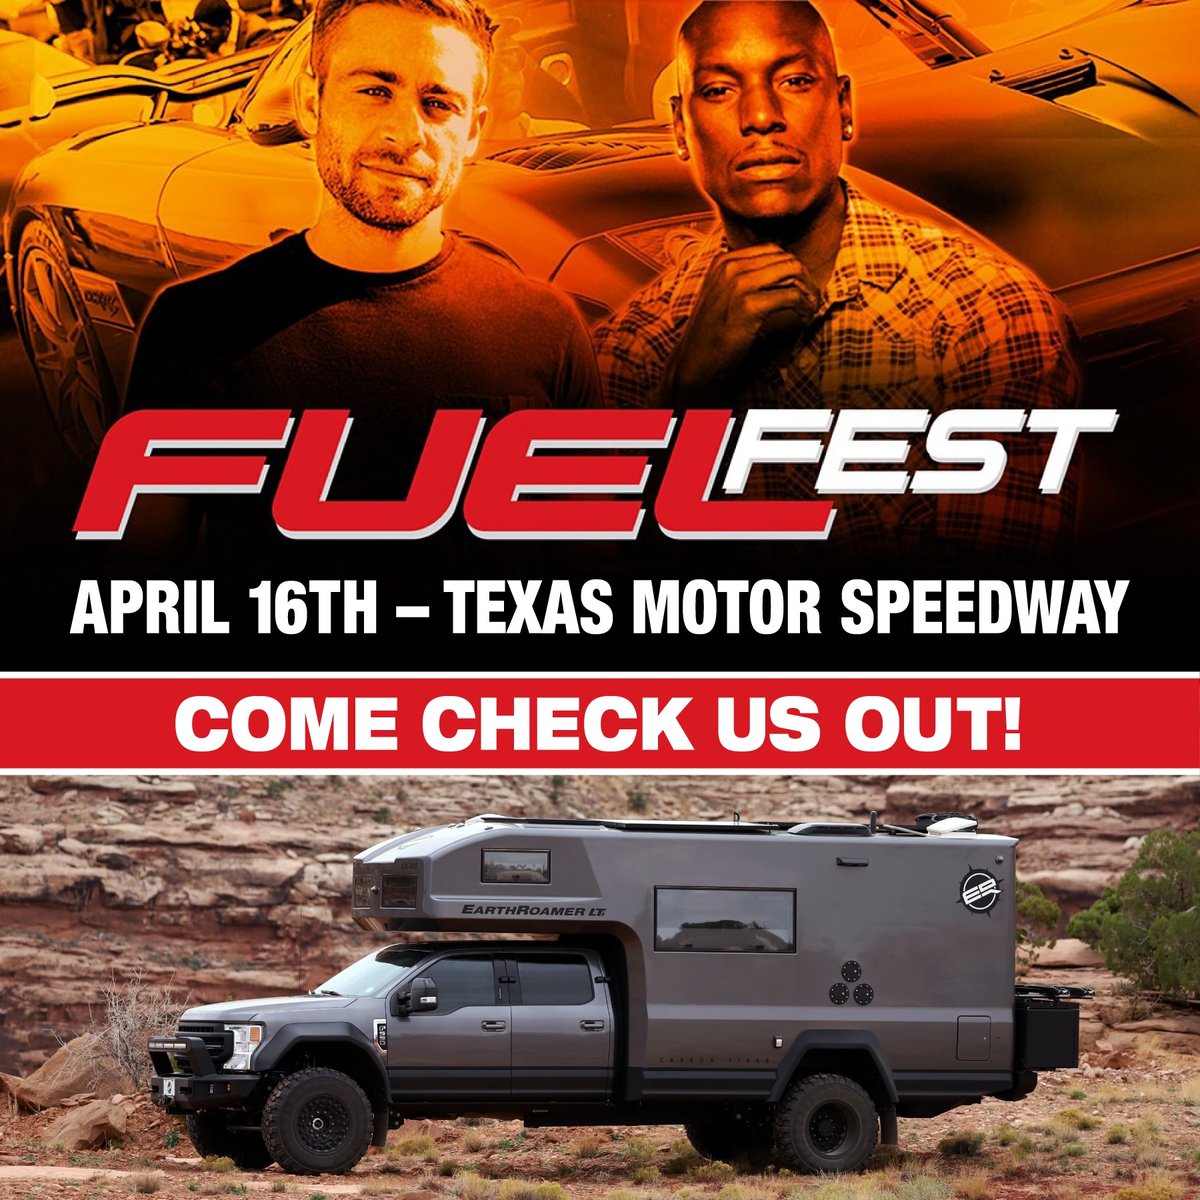 Come visit EarthRoamer this Friday, April 16th at Fuel Fest at the Texas Motor Speedway!

#Earthroamer #expeditionvehicle #overlanderlife #overlandvehicles #campinglifestyle #4x4camper #travel #explorer